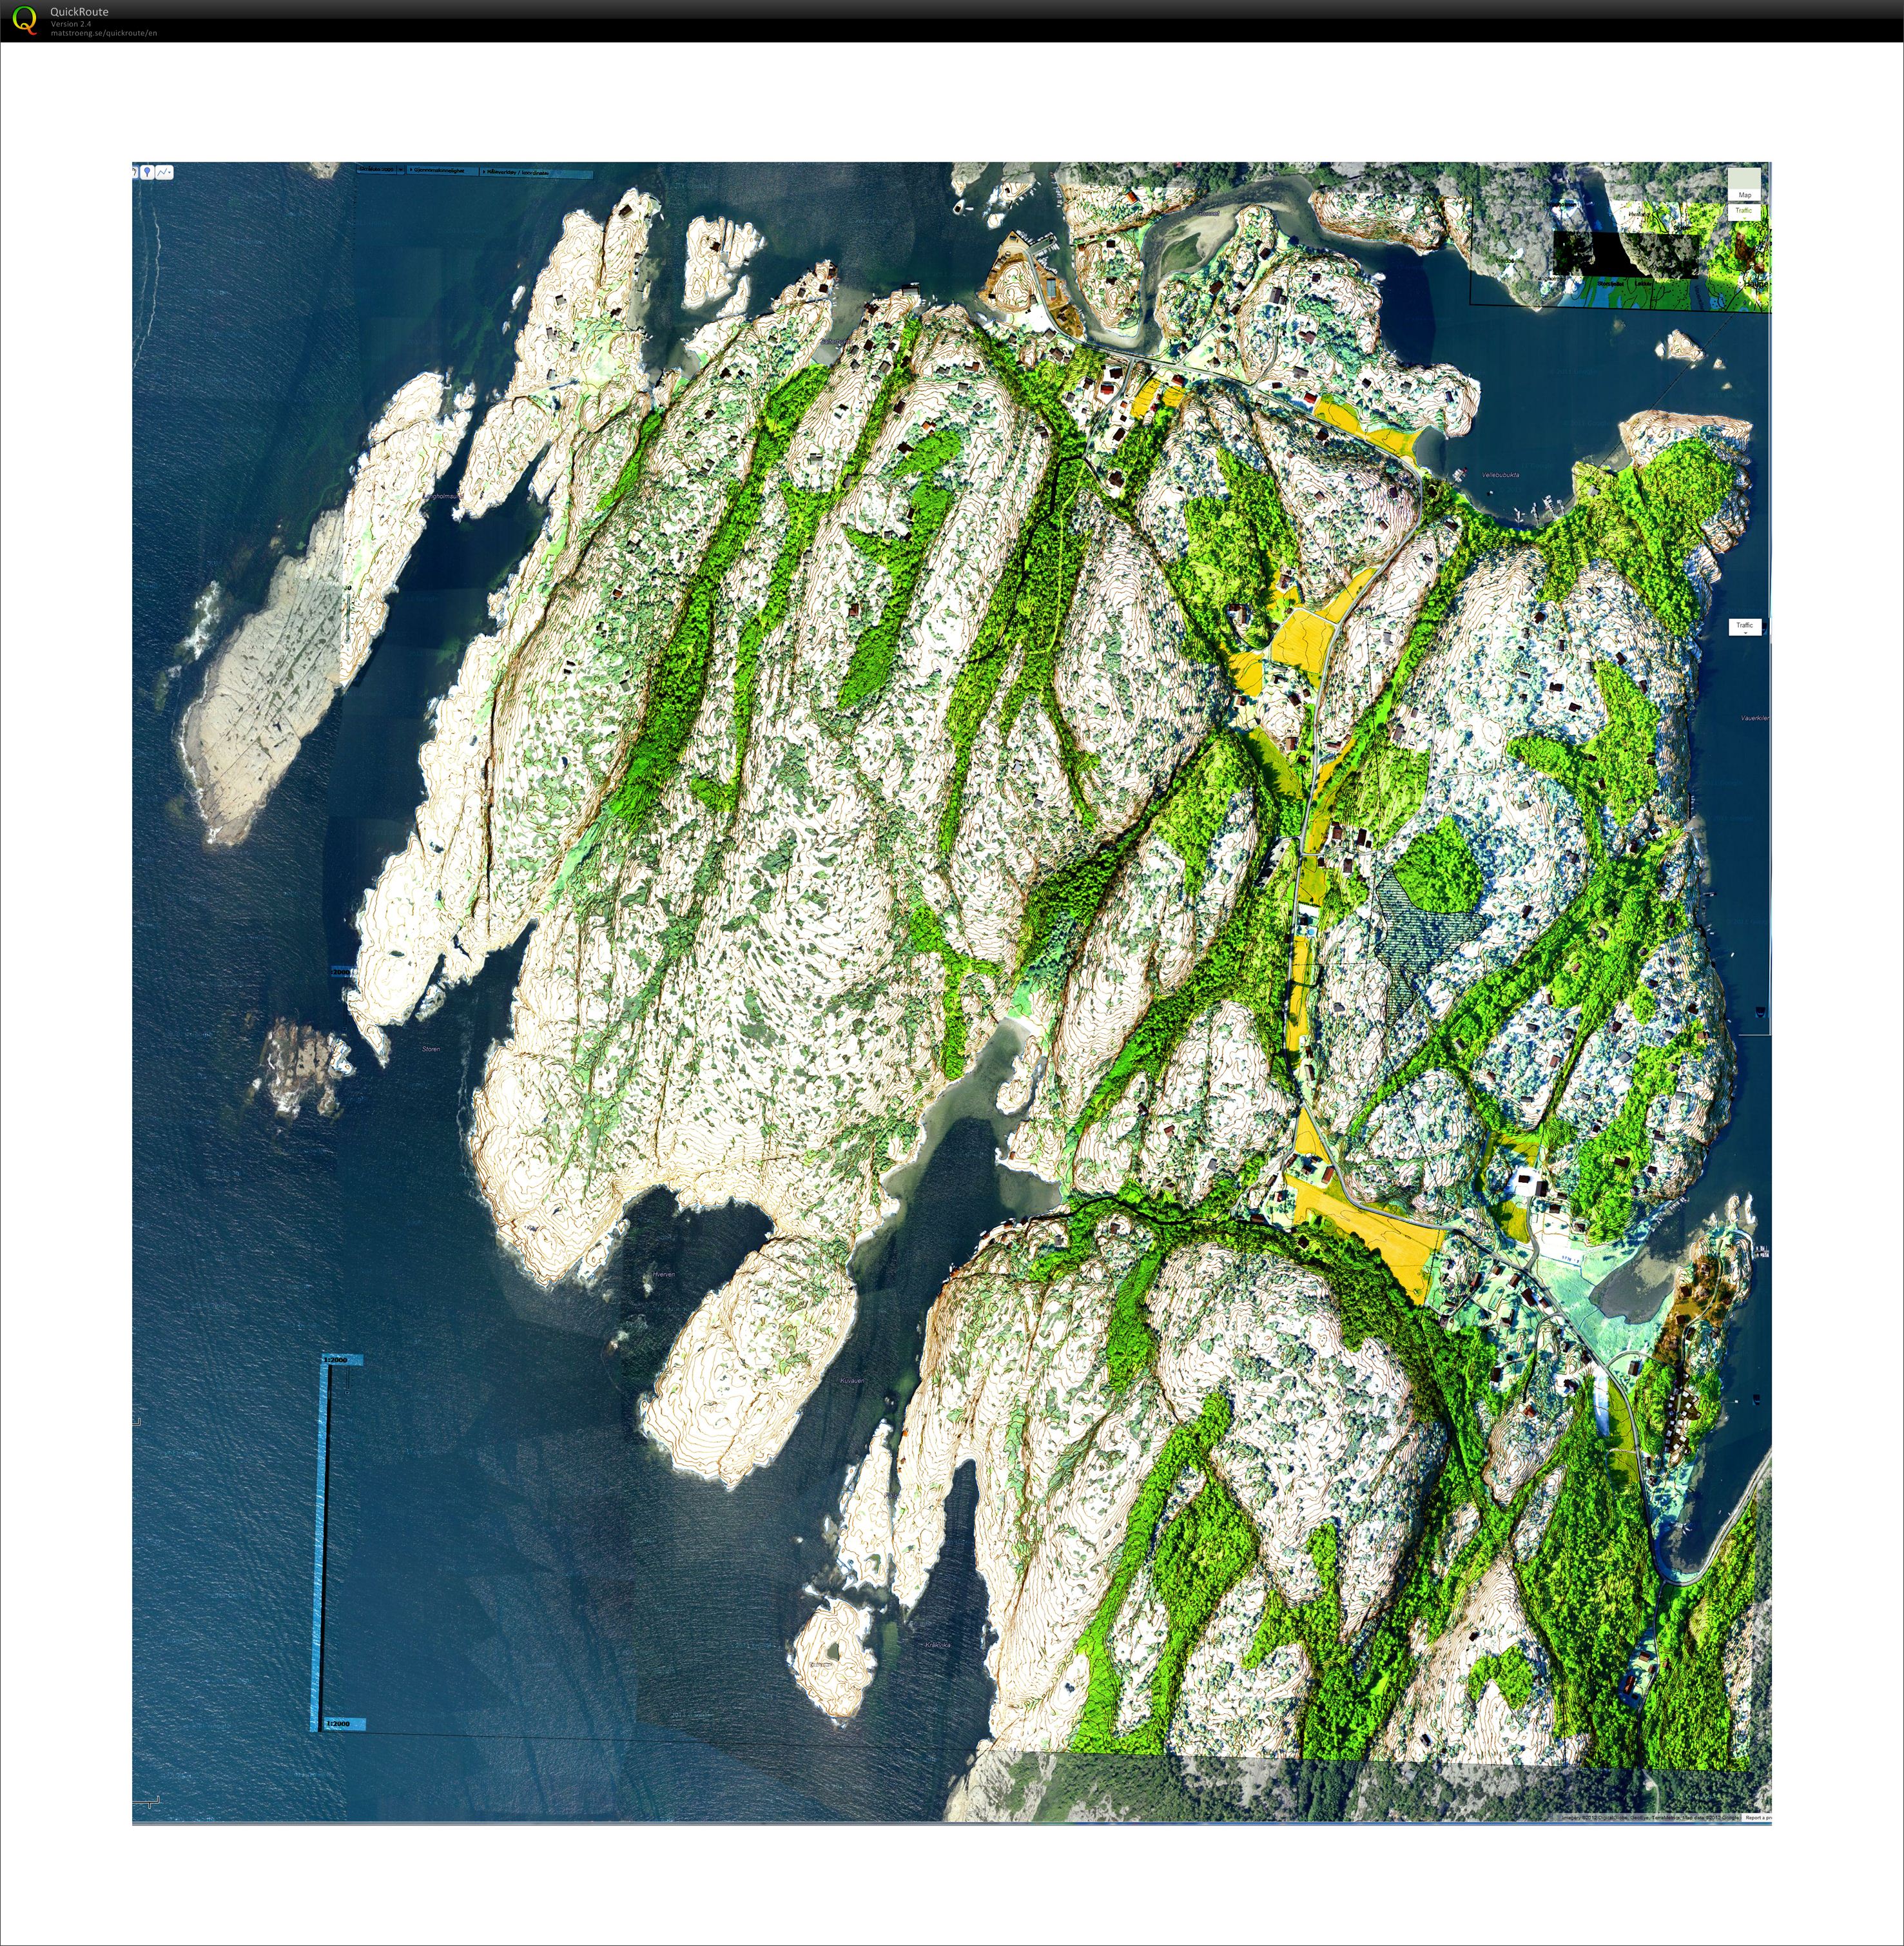 Papperhavn: A mapping experiment (10.06.2012)